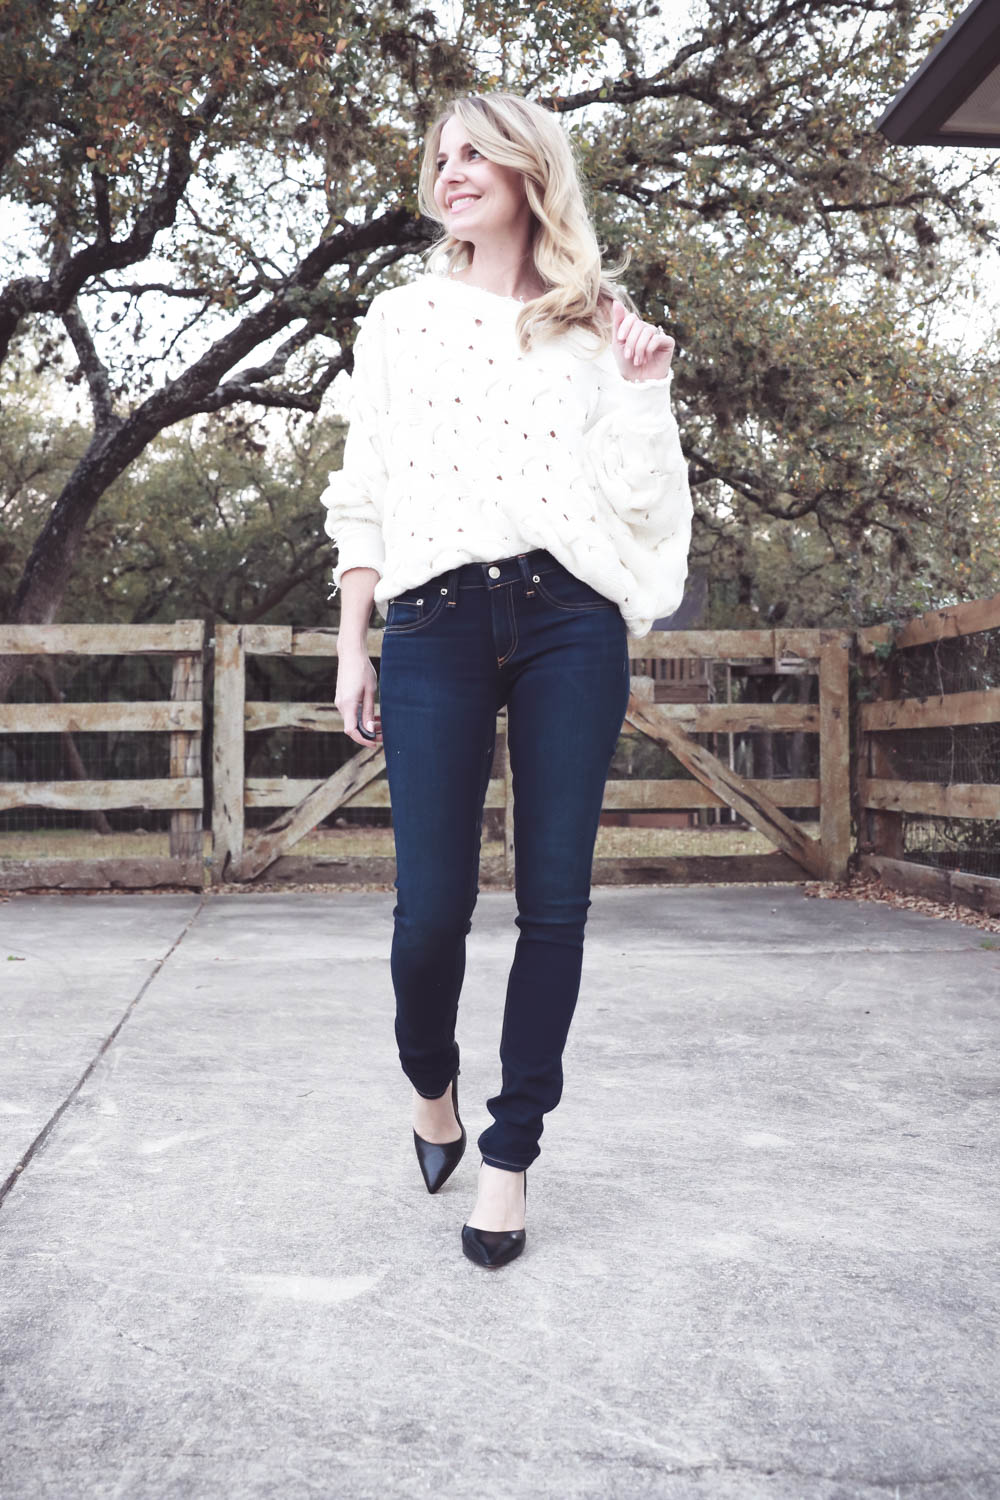 Spring wardrobe basics with erin busbee of busbeestyle and nordstrom featuring a pair of dark wash skinny jeans by Rag and bone from nordstrom